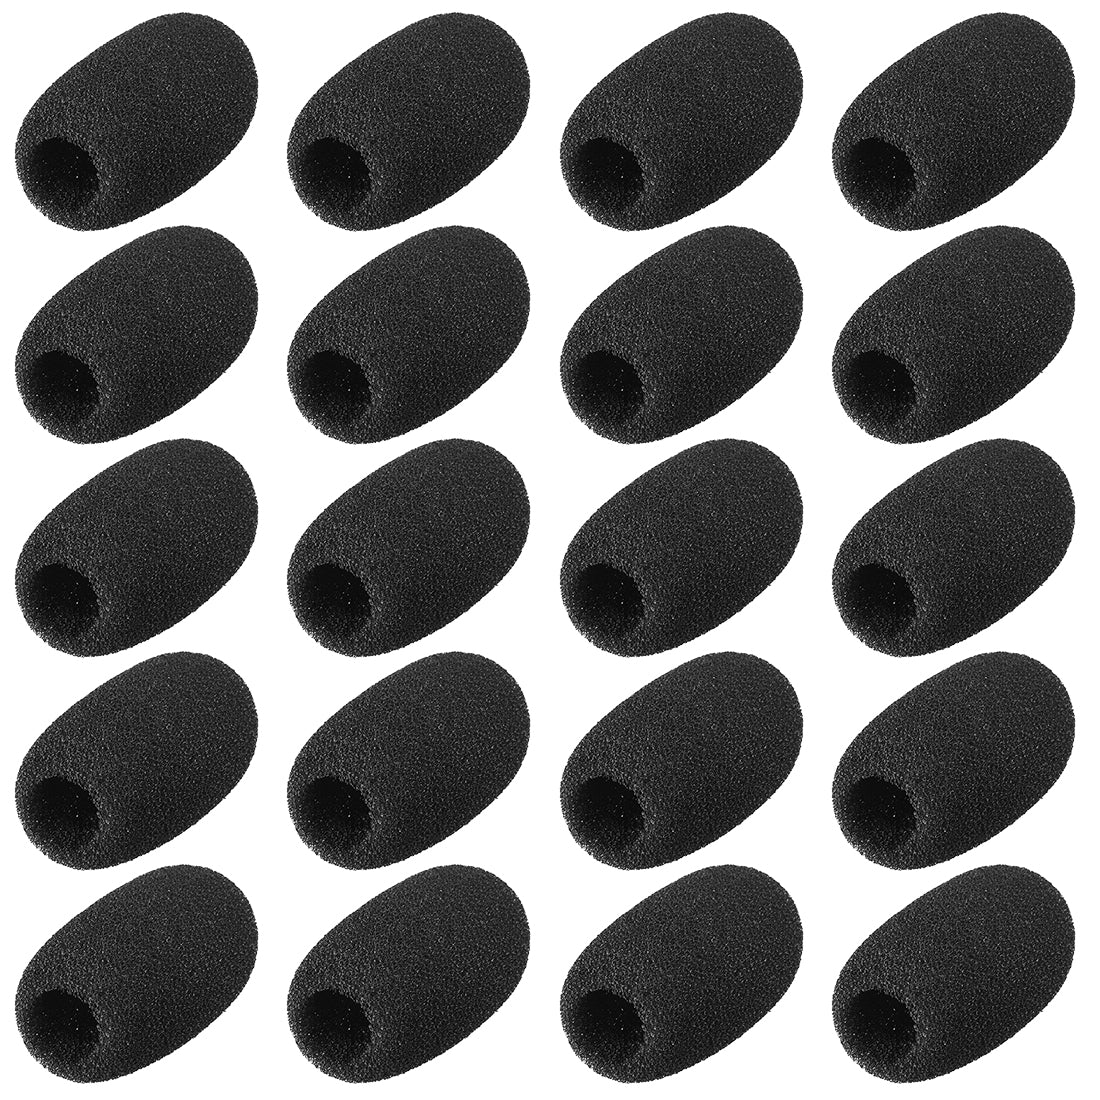 uxcell Uxcell 20PCS Sponge Foam Mic Cover Conference Microphone Windscreen Shield Protection Black 42mm Long